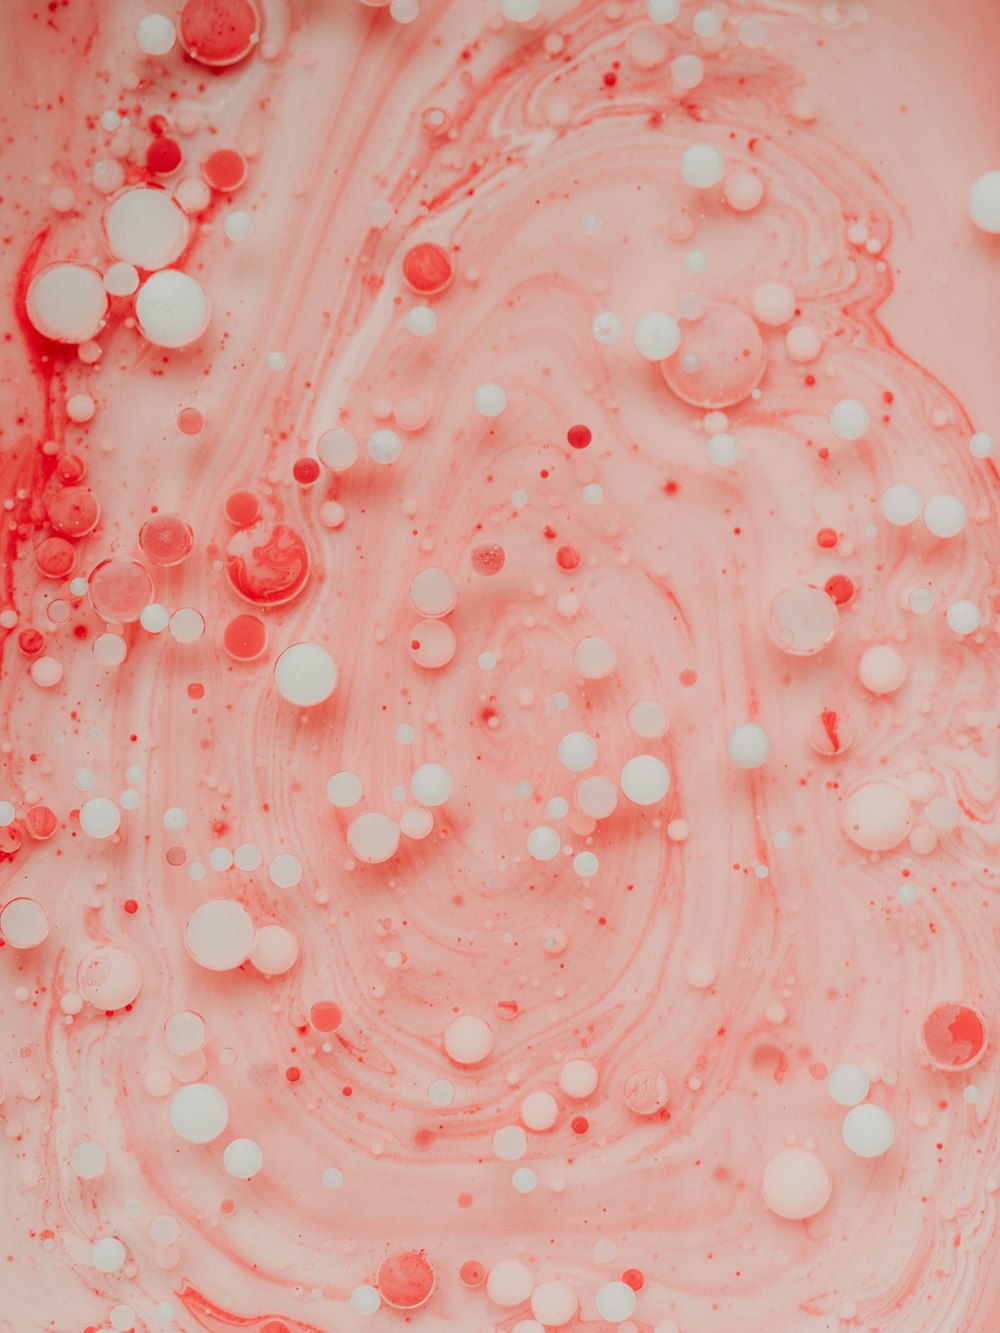 pink and white bubbles on water